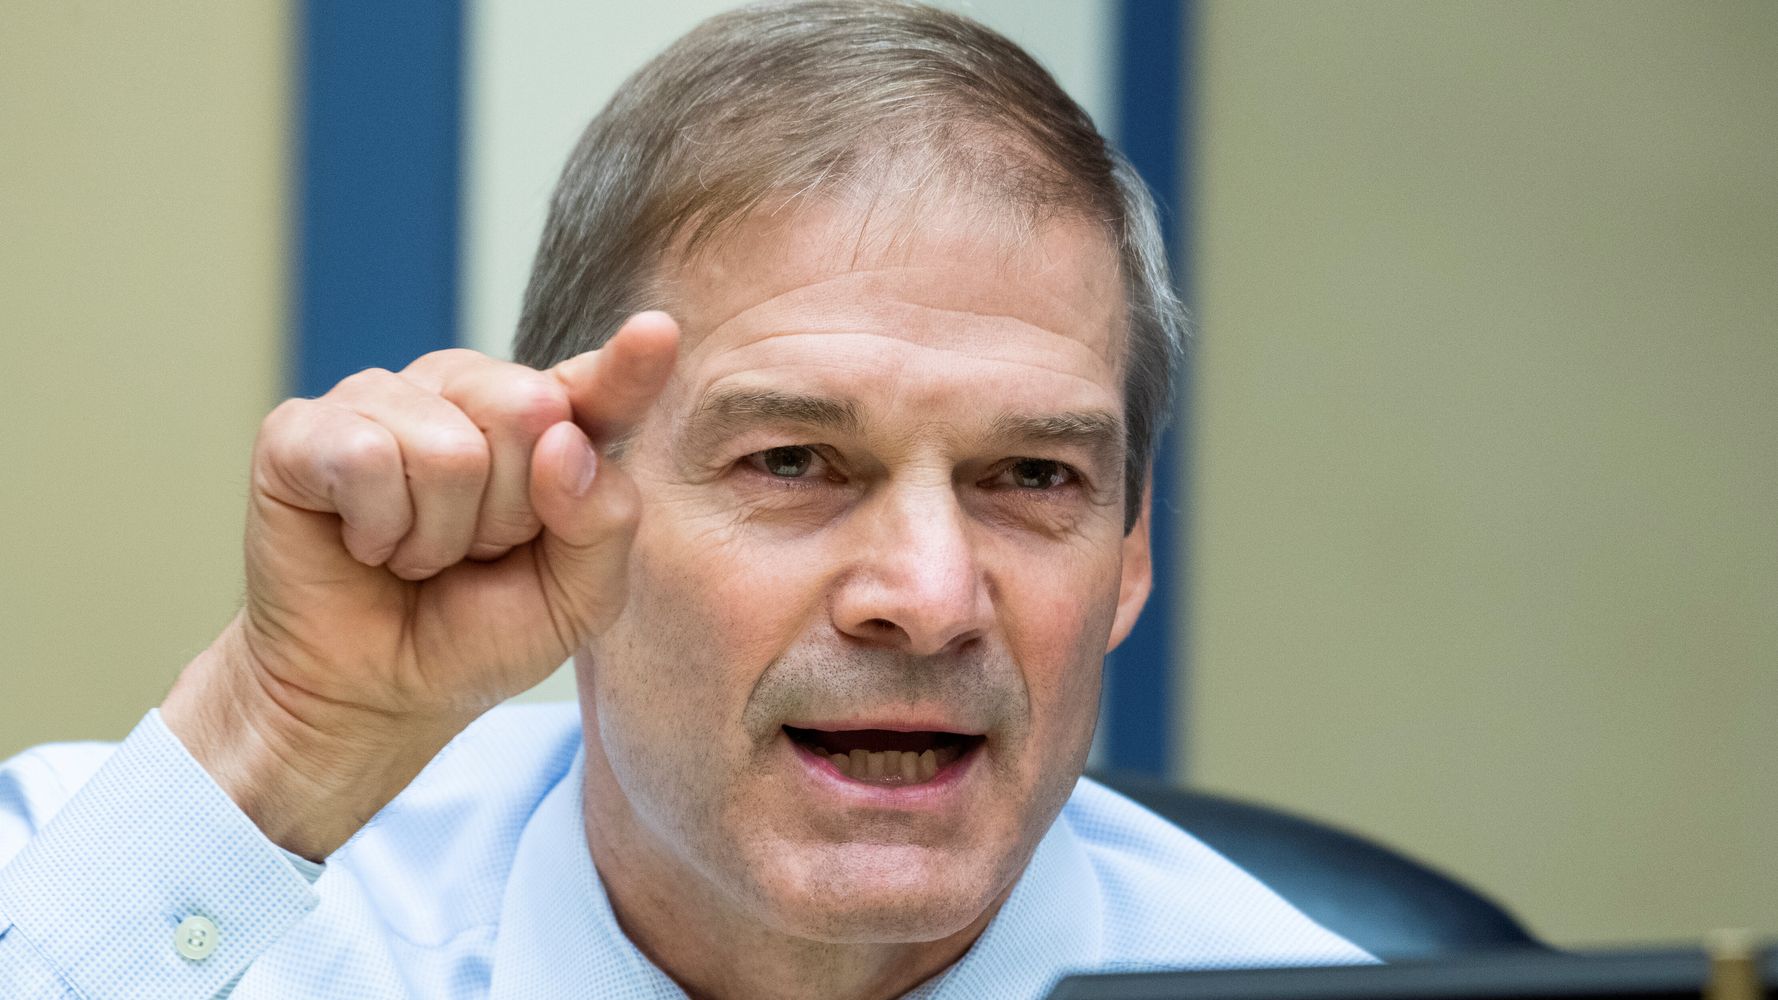 Jim Jordan's Own Words Come Back To Haunt Him In Damning New Supercut Video